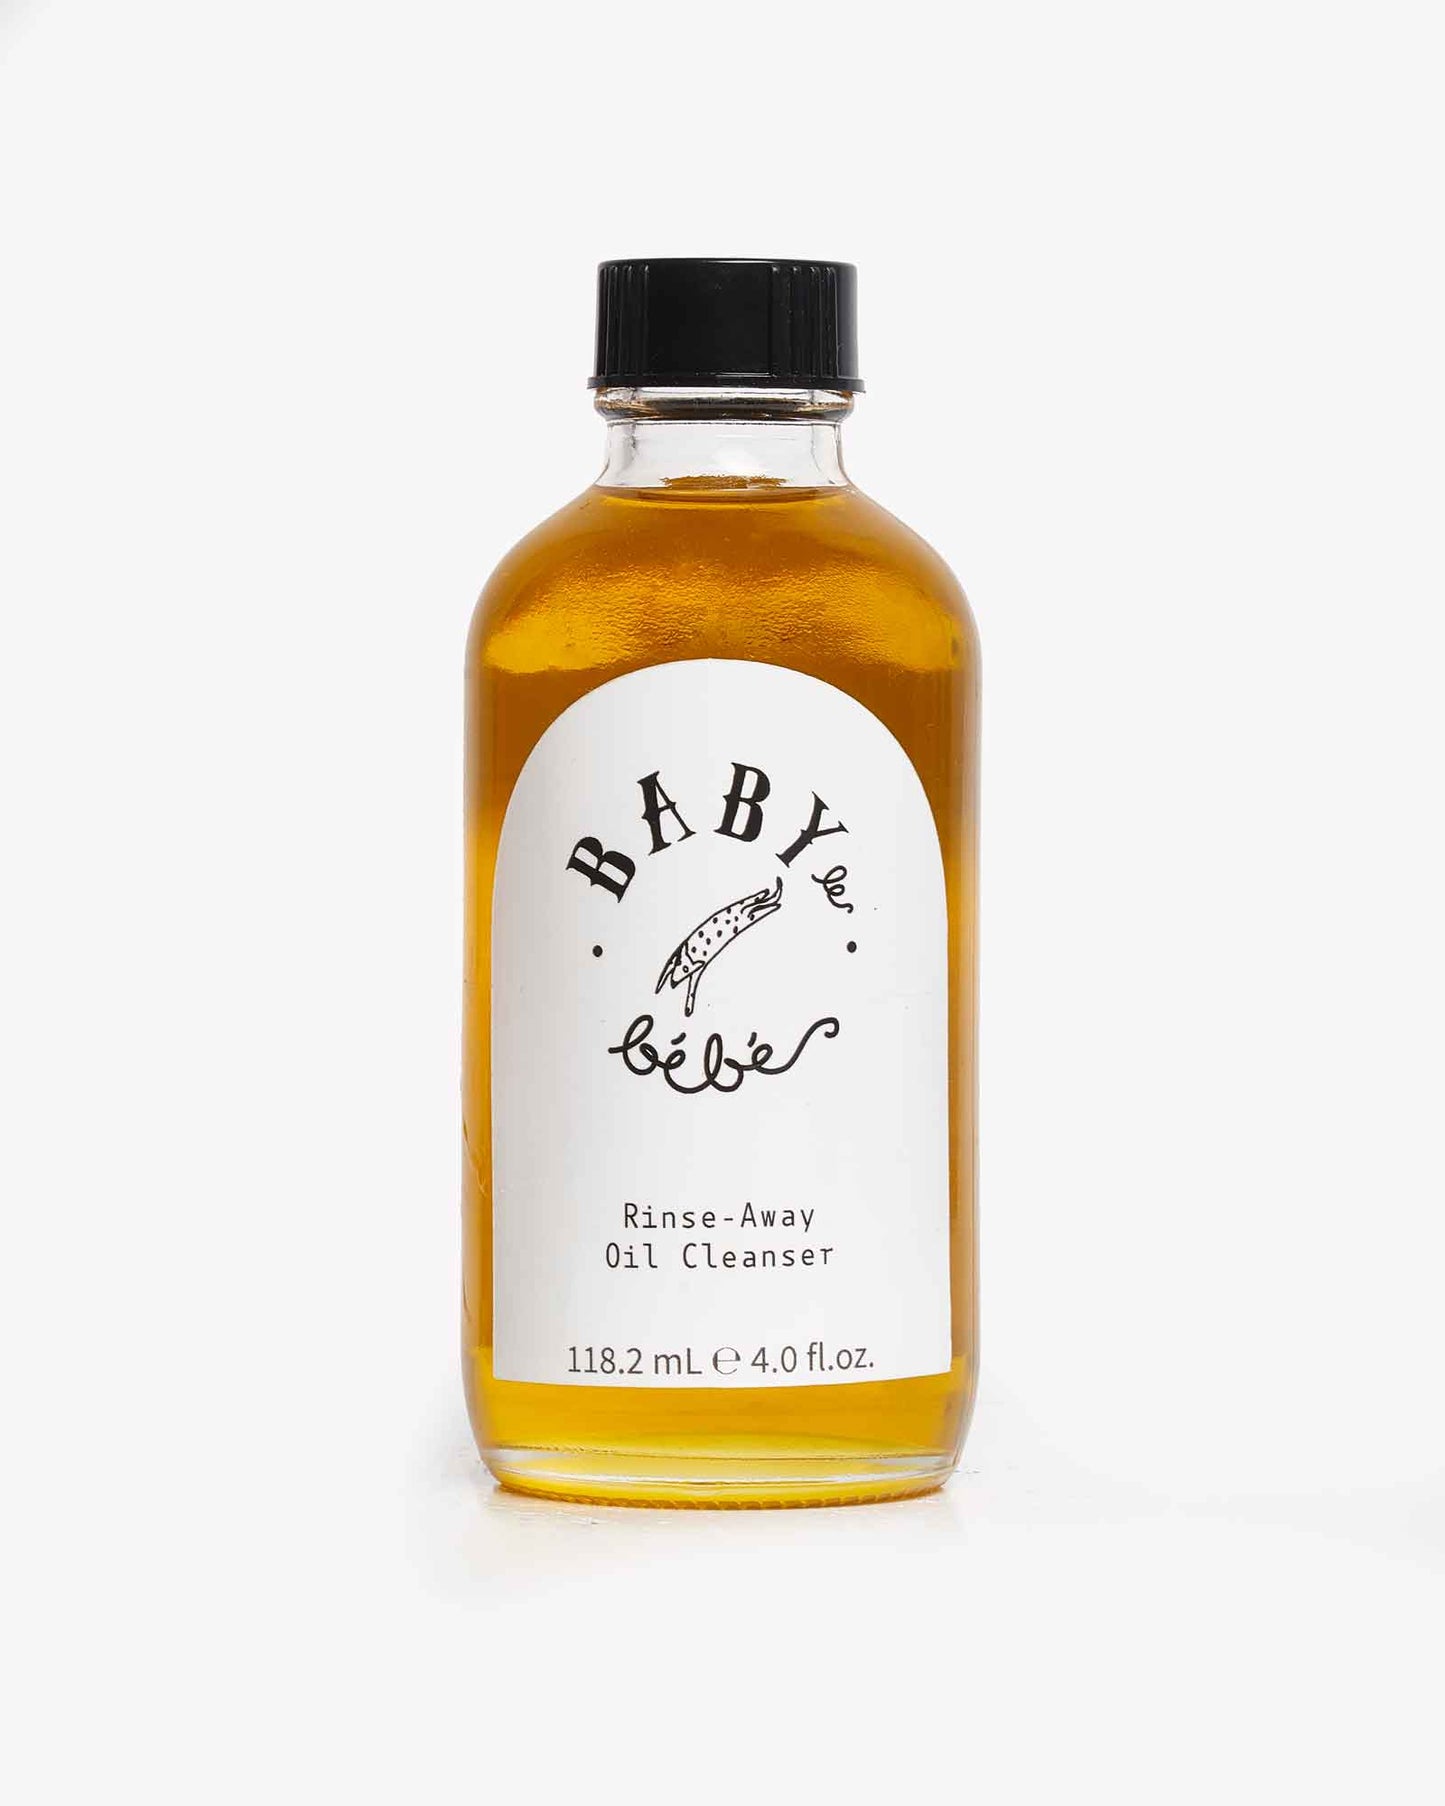 Rinse-Away Oil Cleanser